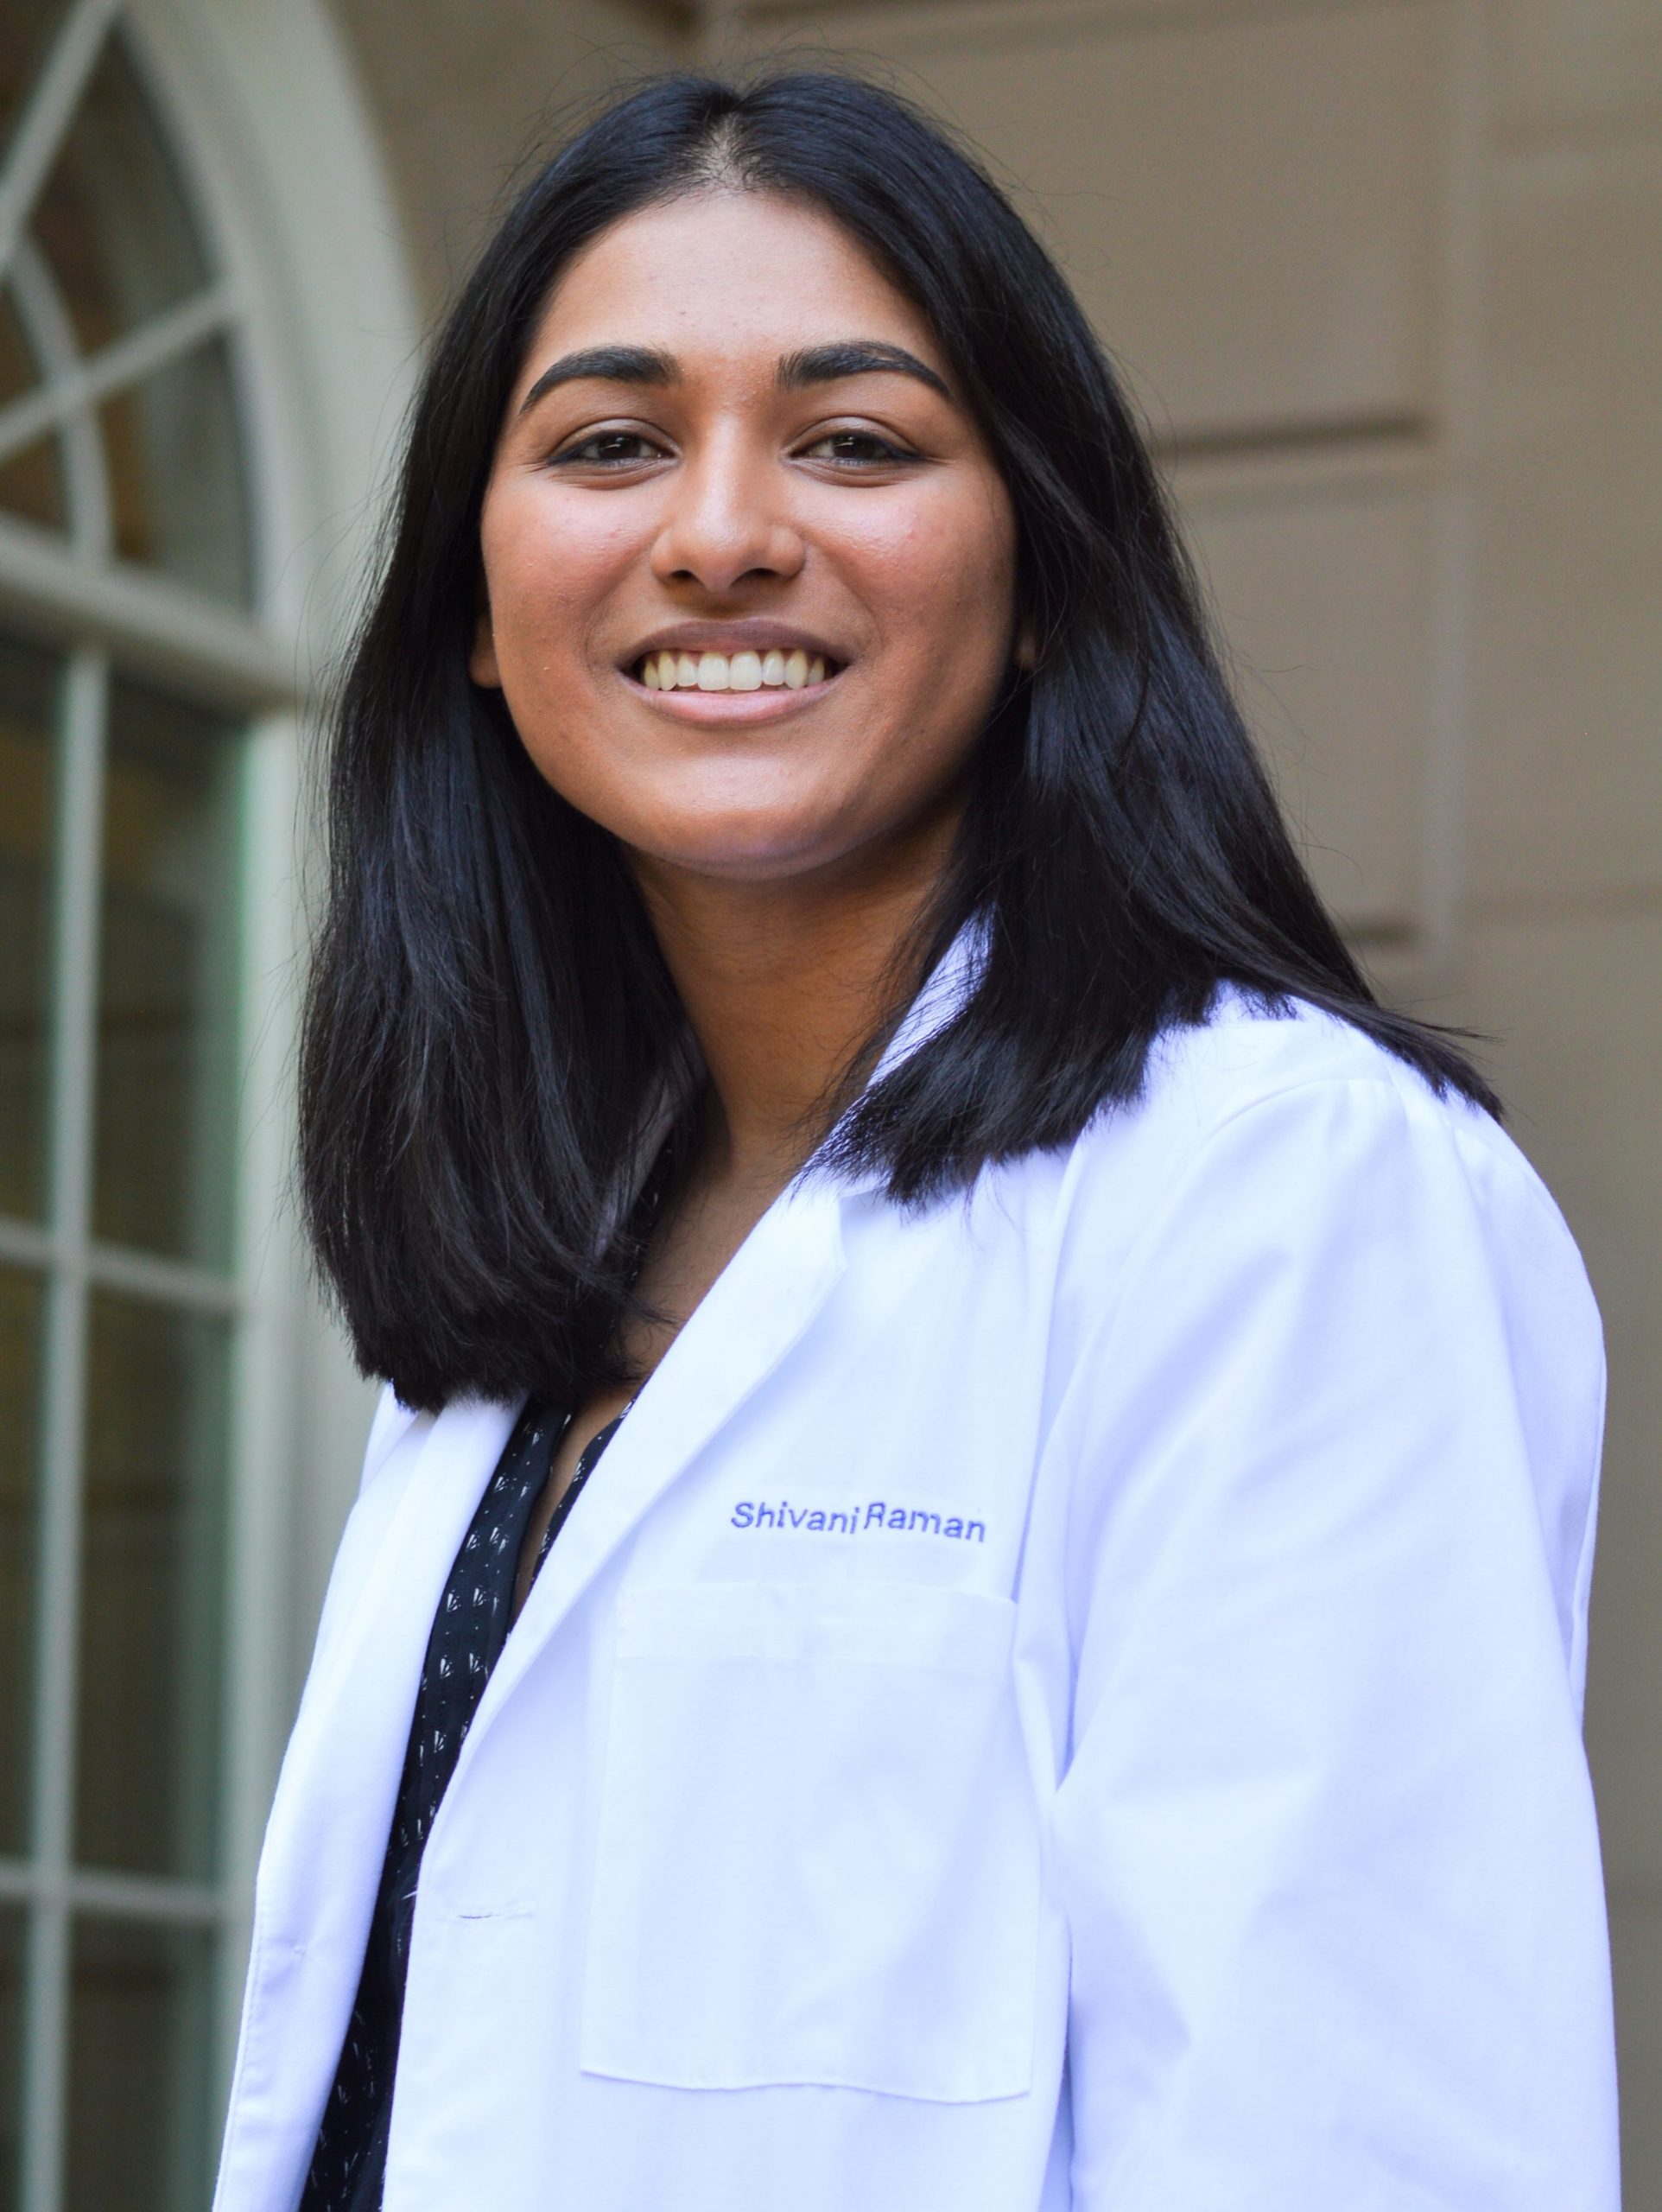 2021 Albert Schweitzer Fellow, Shivani Raman pictured in front of the Southwestern Medical Foundation offices. Her fellowship focuses on improving hypertension management.